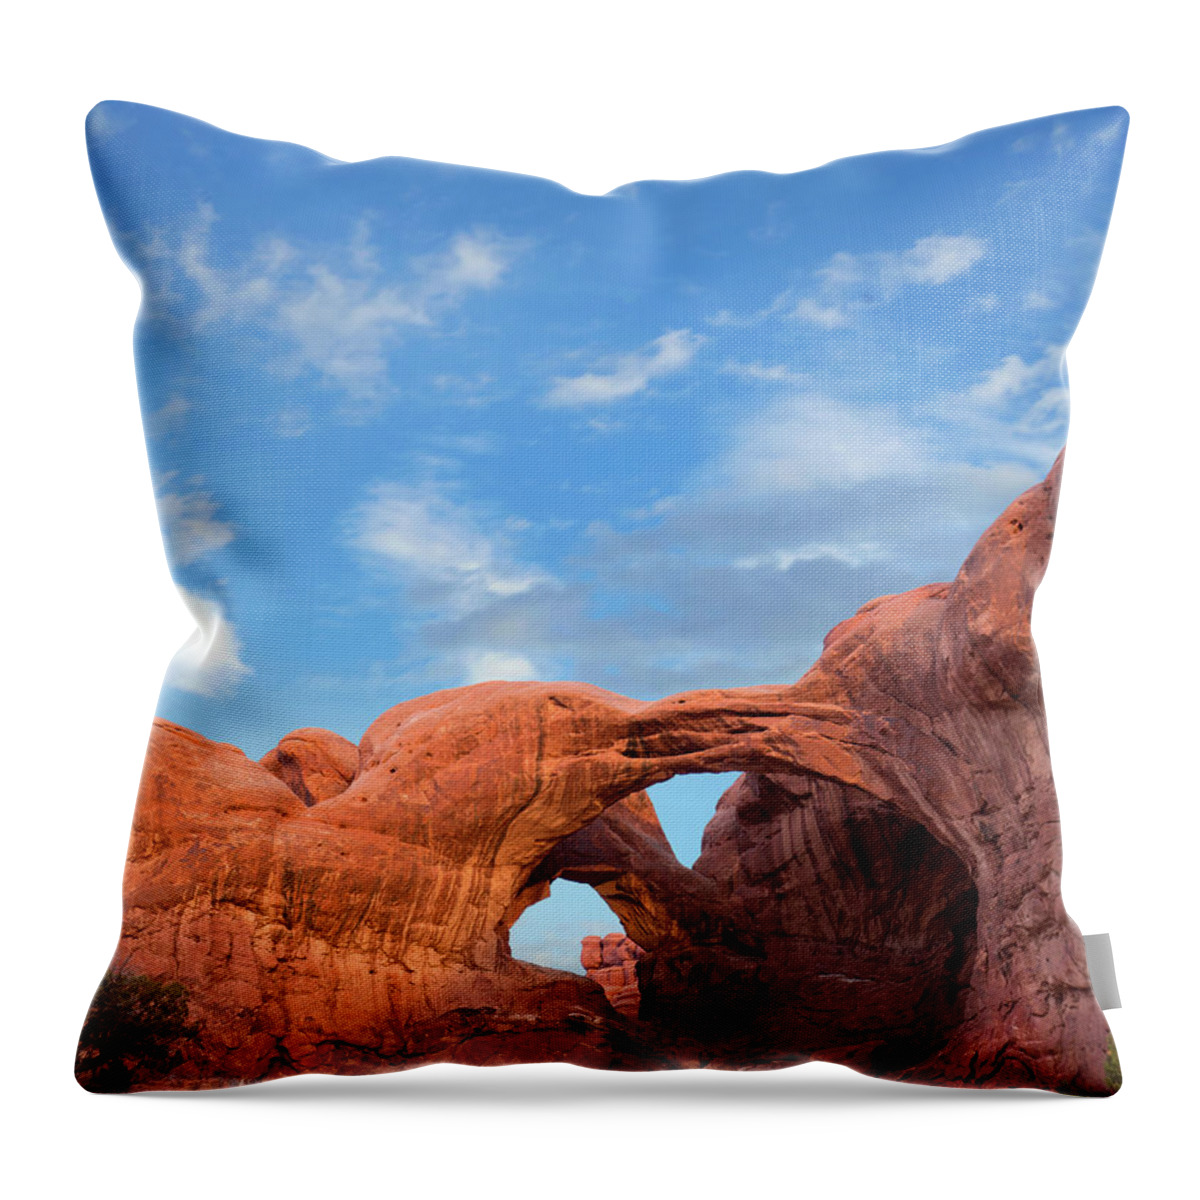 00565368 Throw Pillow featuring the photograph Double Arch, Arches National Park, Utah by Tim Fitzharris